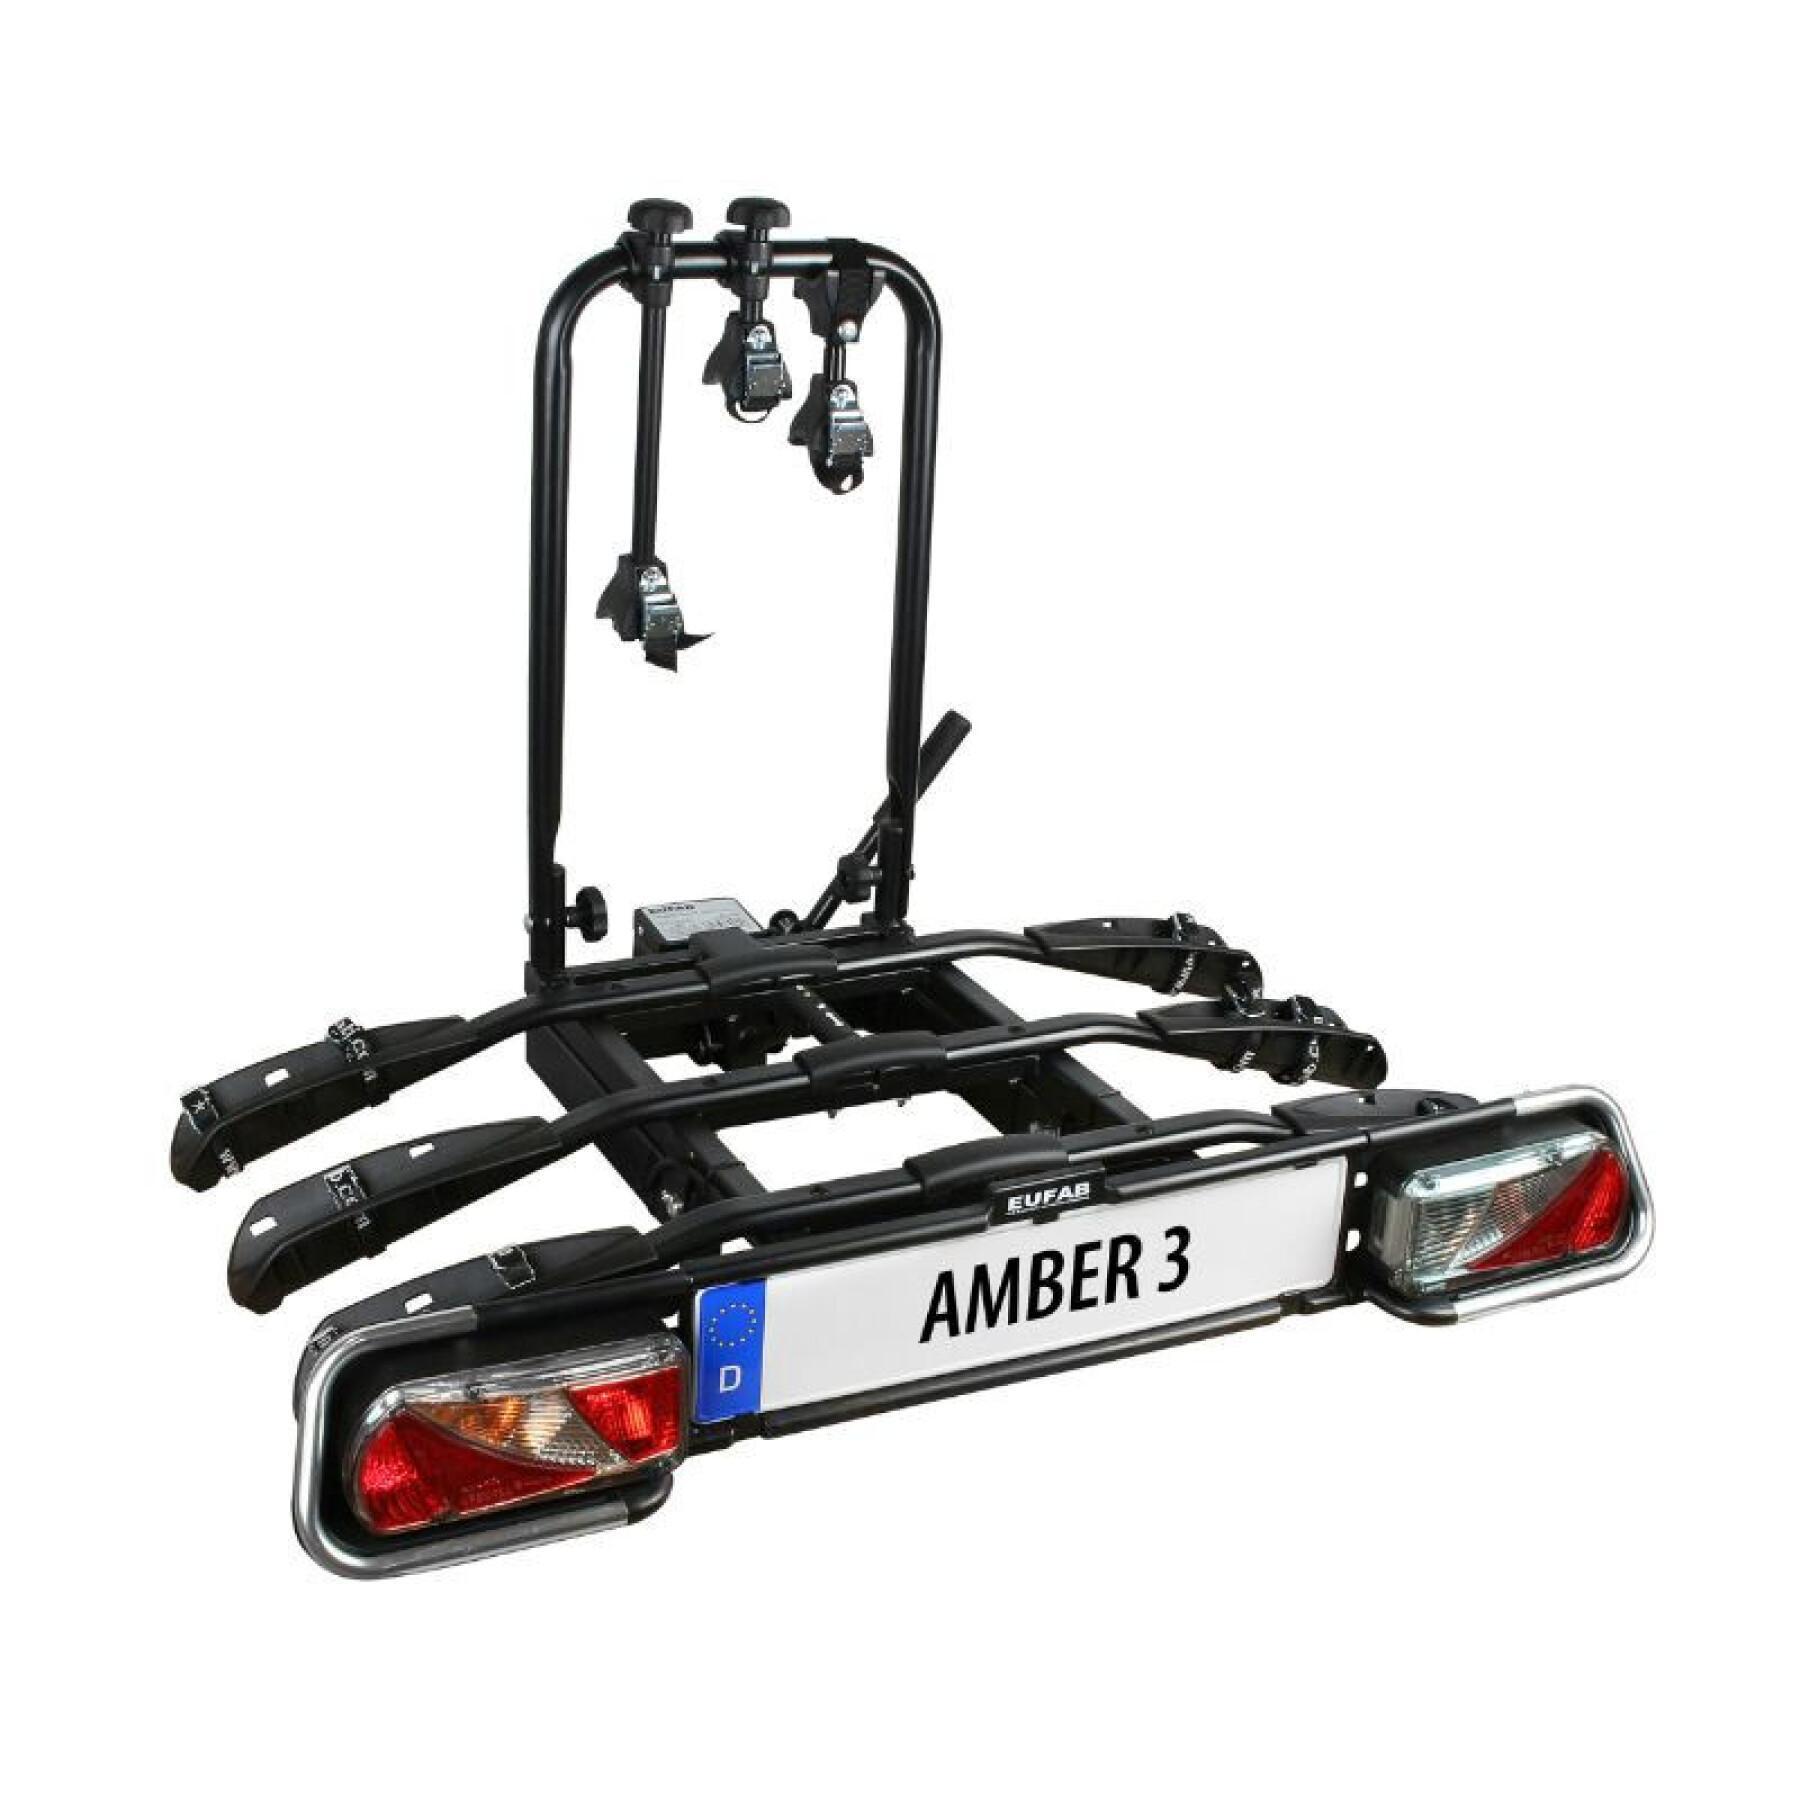 Bike carrier for 3 bikes - rapide - compatible to put 2 bikes - max load 60kgs Eufab Amber